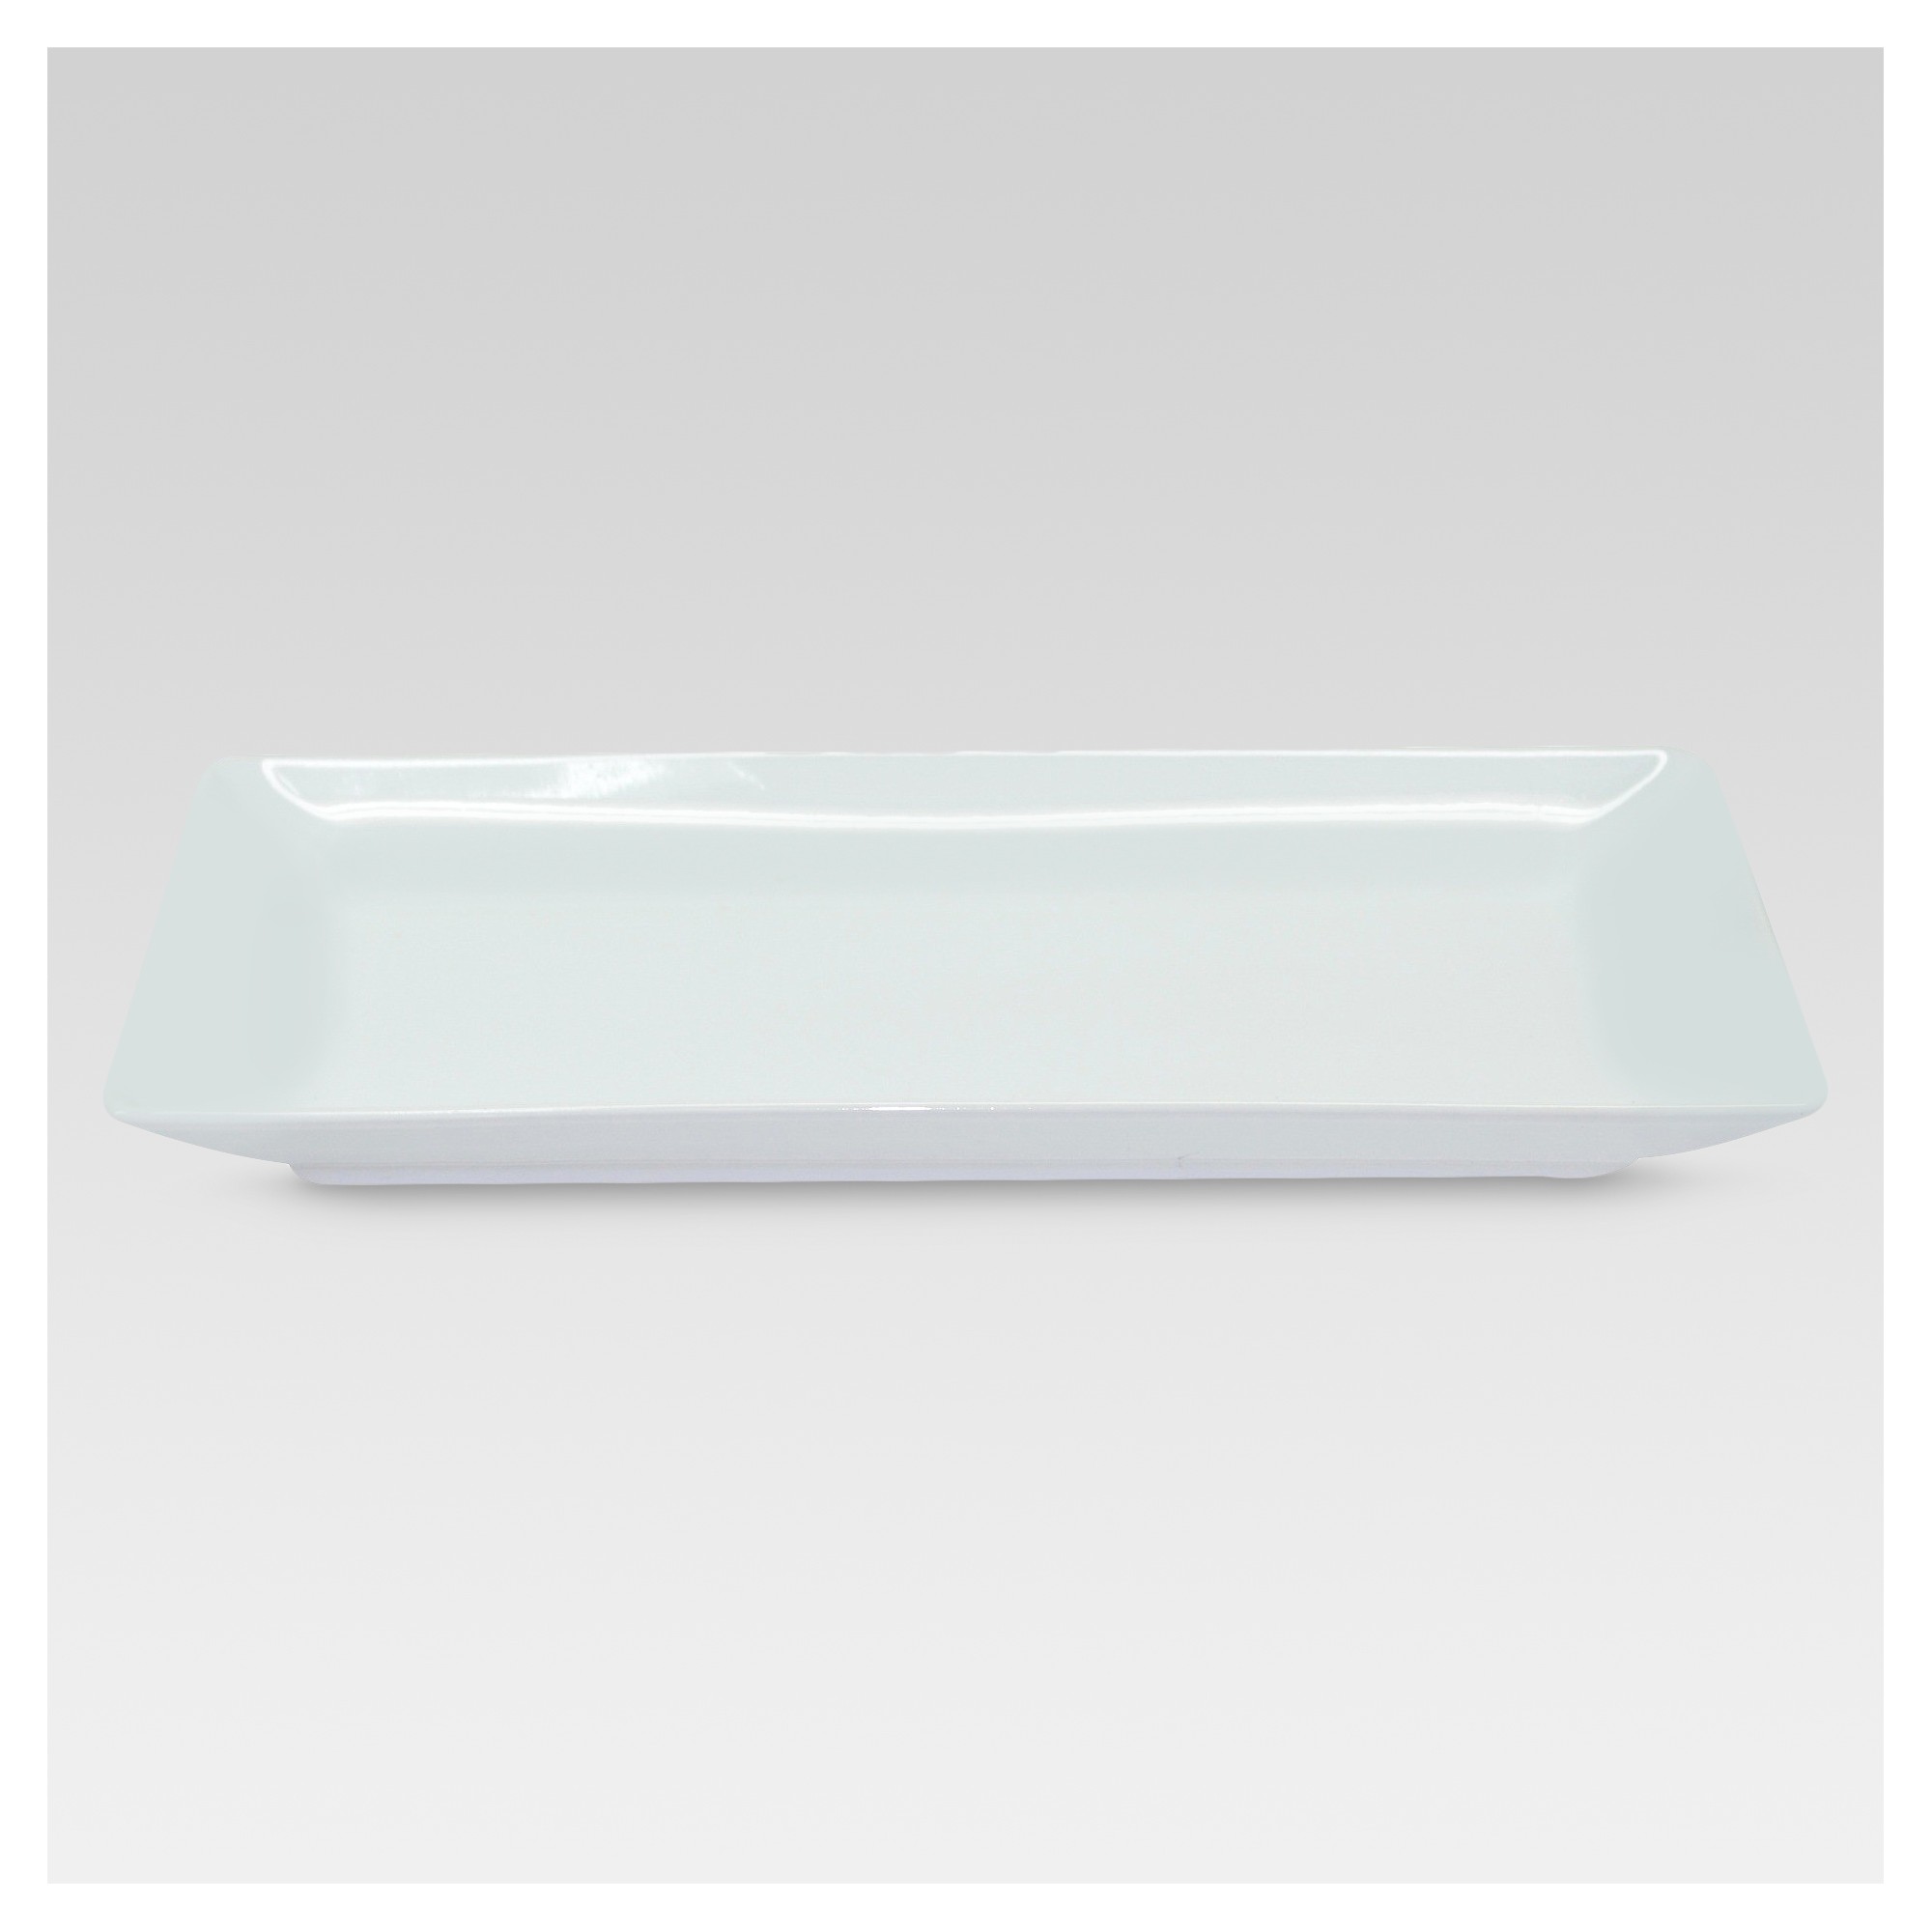 'Rectangle Serving Tray 12.2''x6.46'' Porcelain - Threshold , Clear'